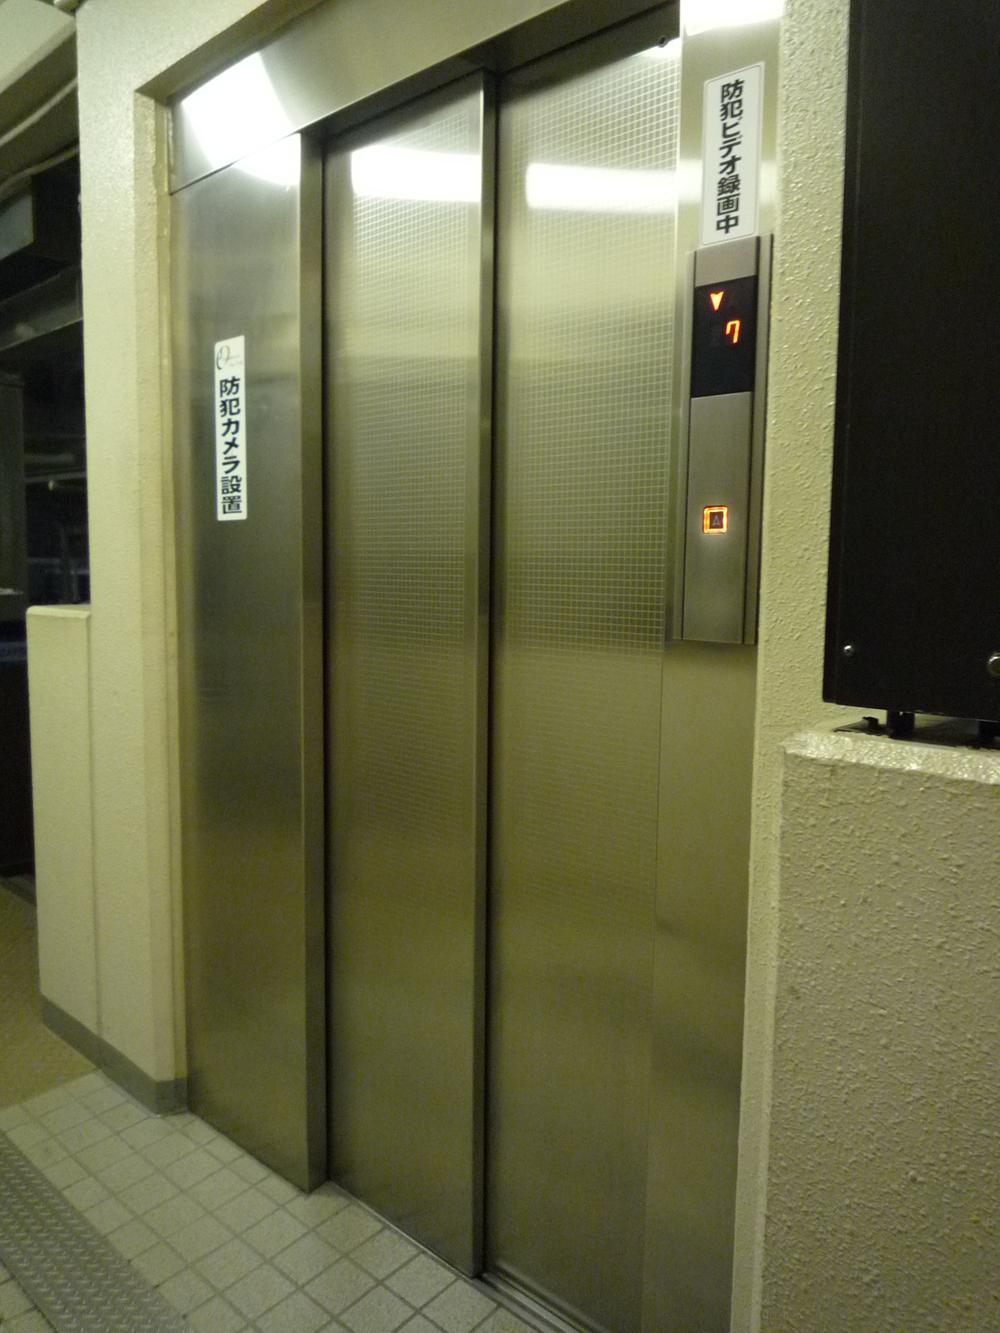 Other common areas. Elevator (2013 October shooting)